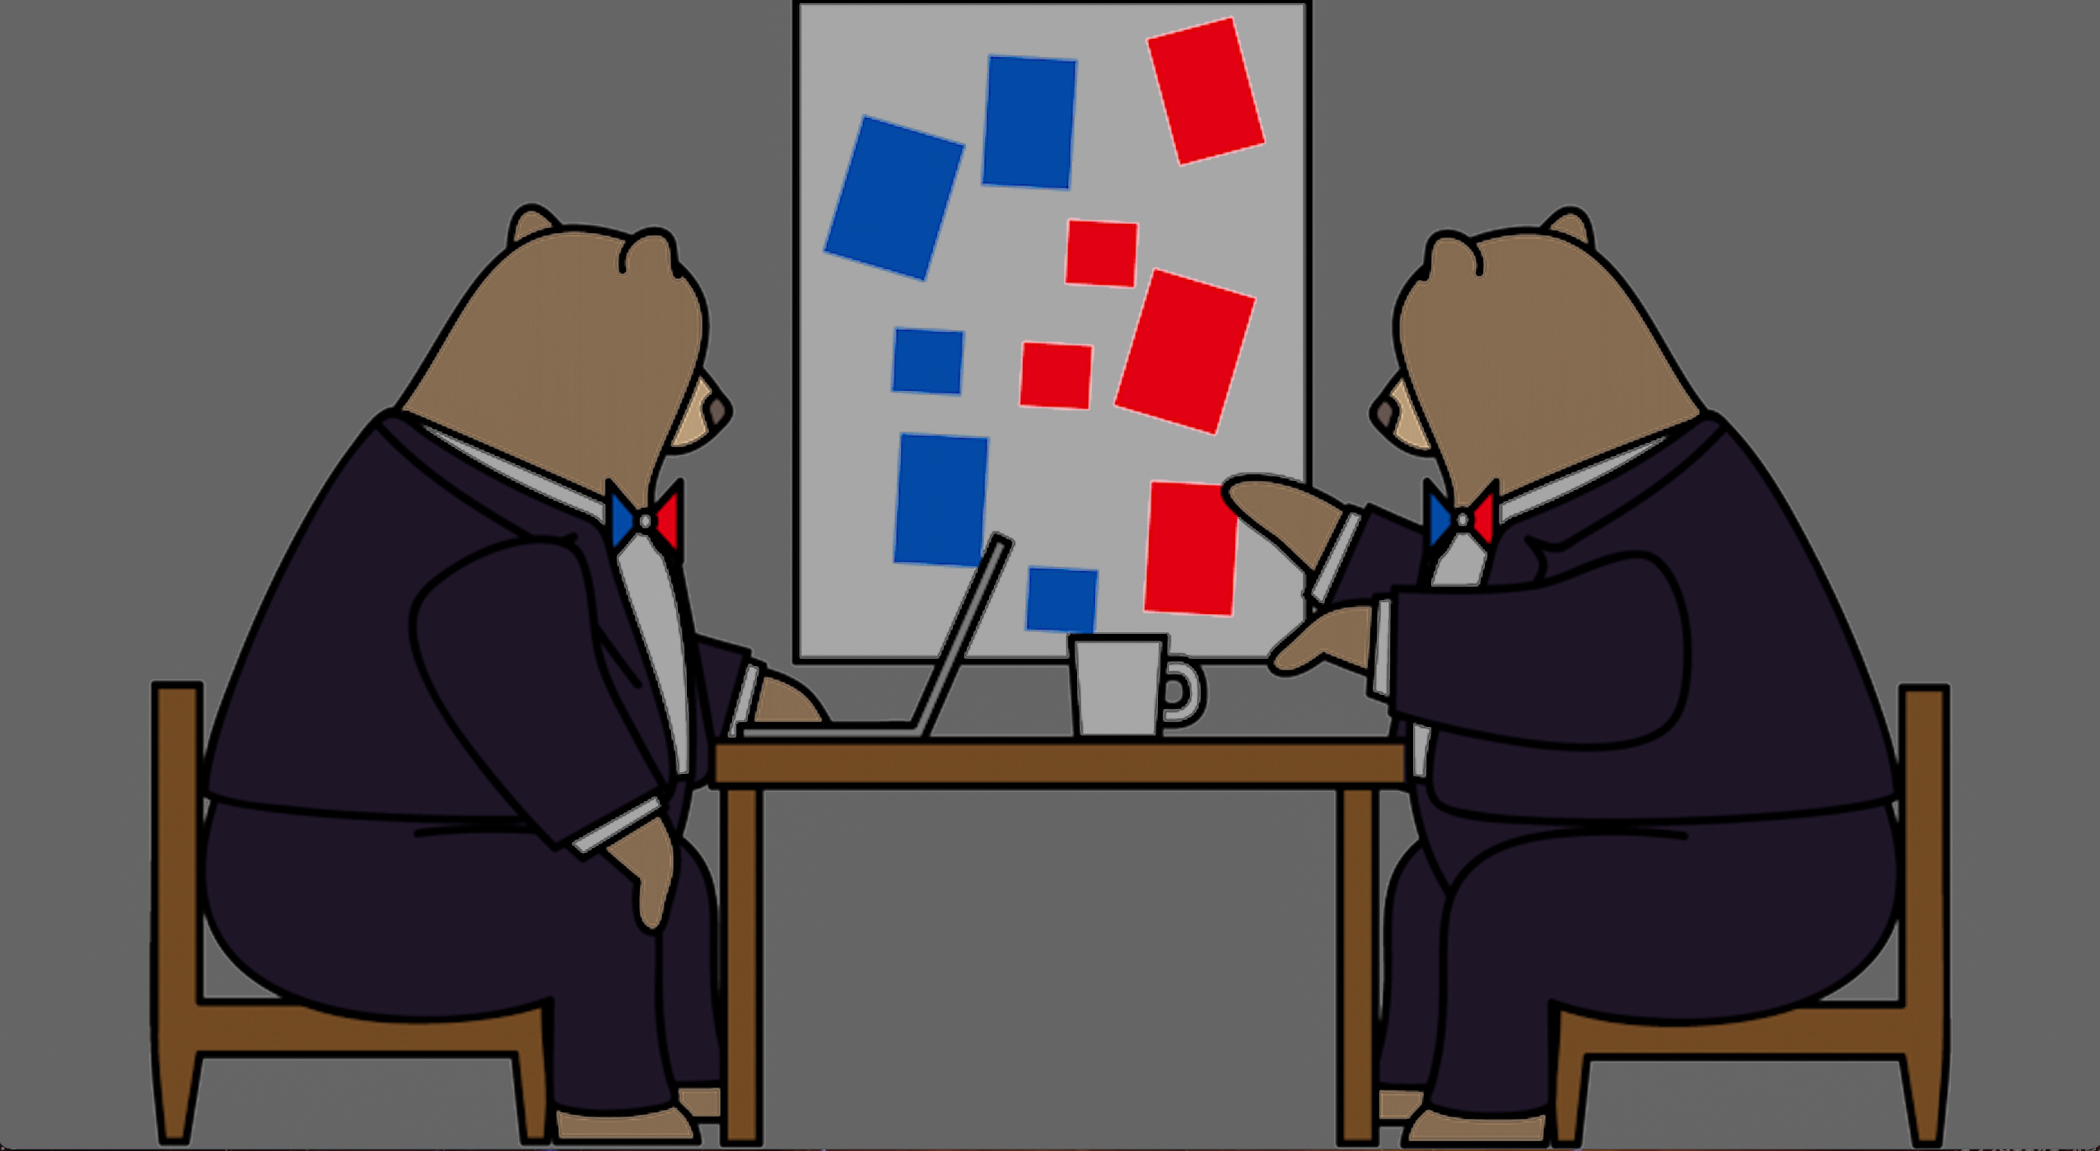 A drawing of two bears in suits sitting at a desk and looking at a poster with red and blue squares on it